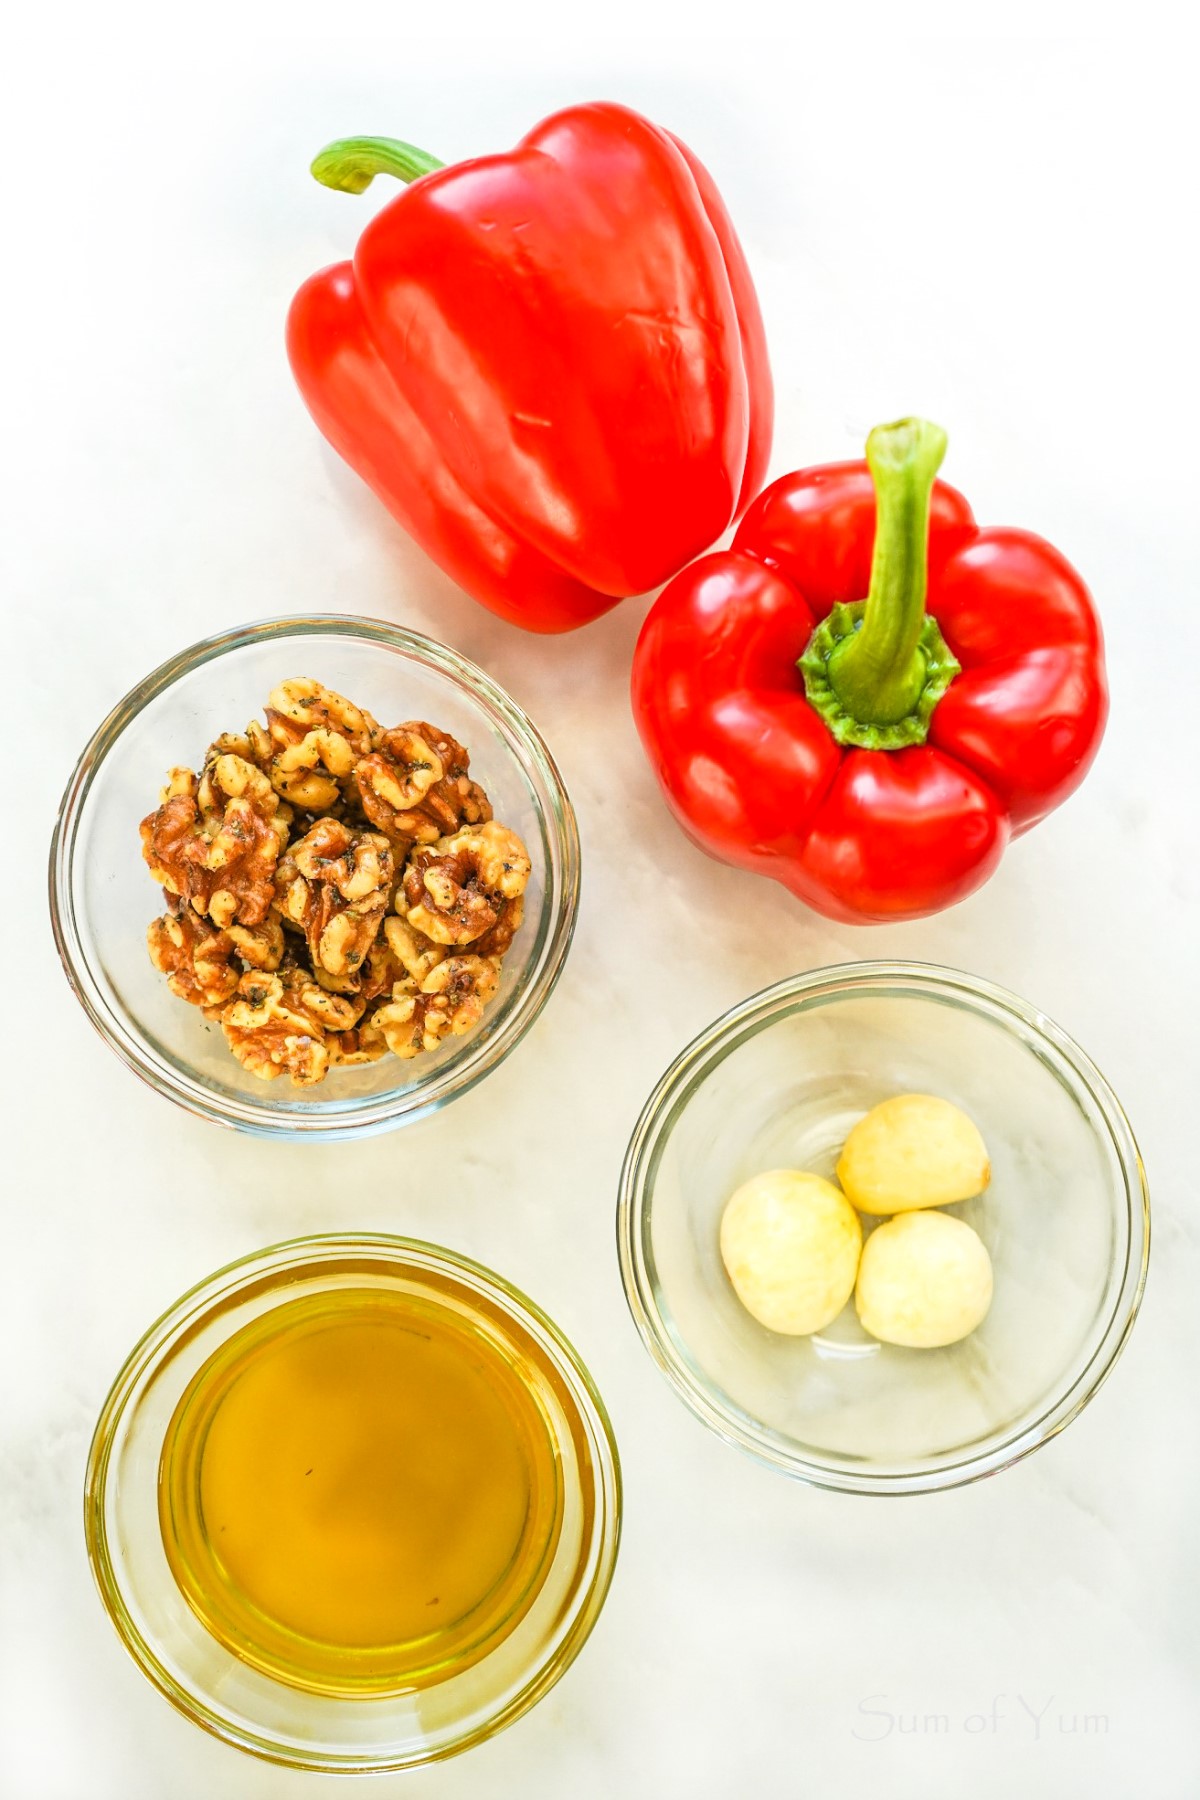 Red Pepper Sauce Ingredients